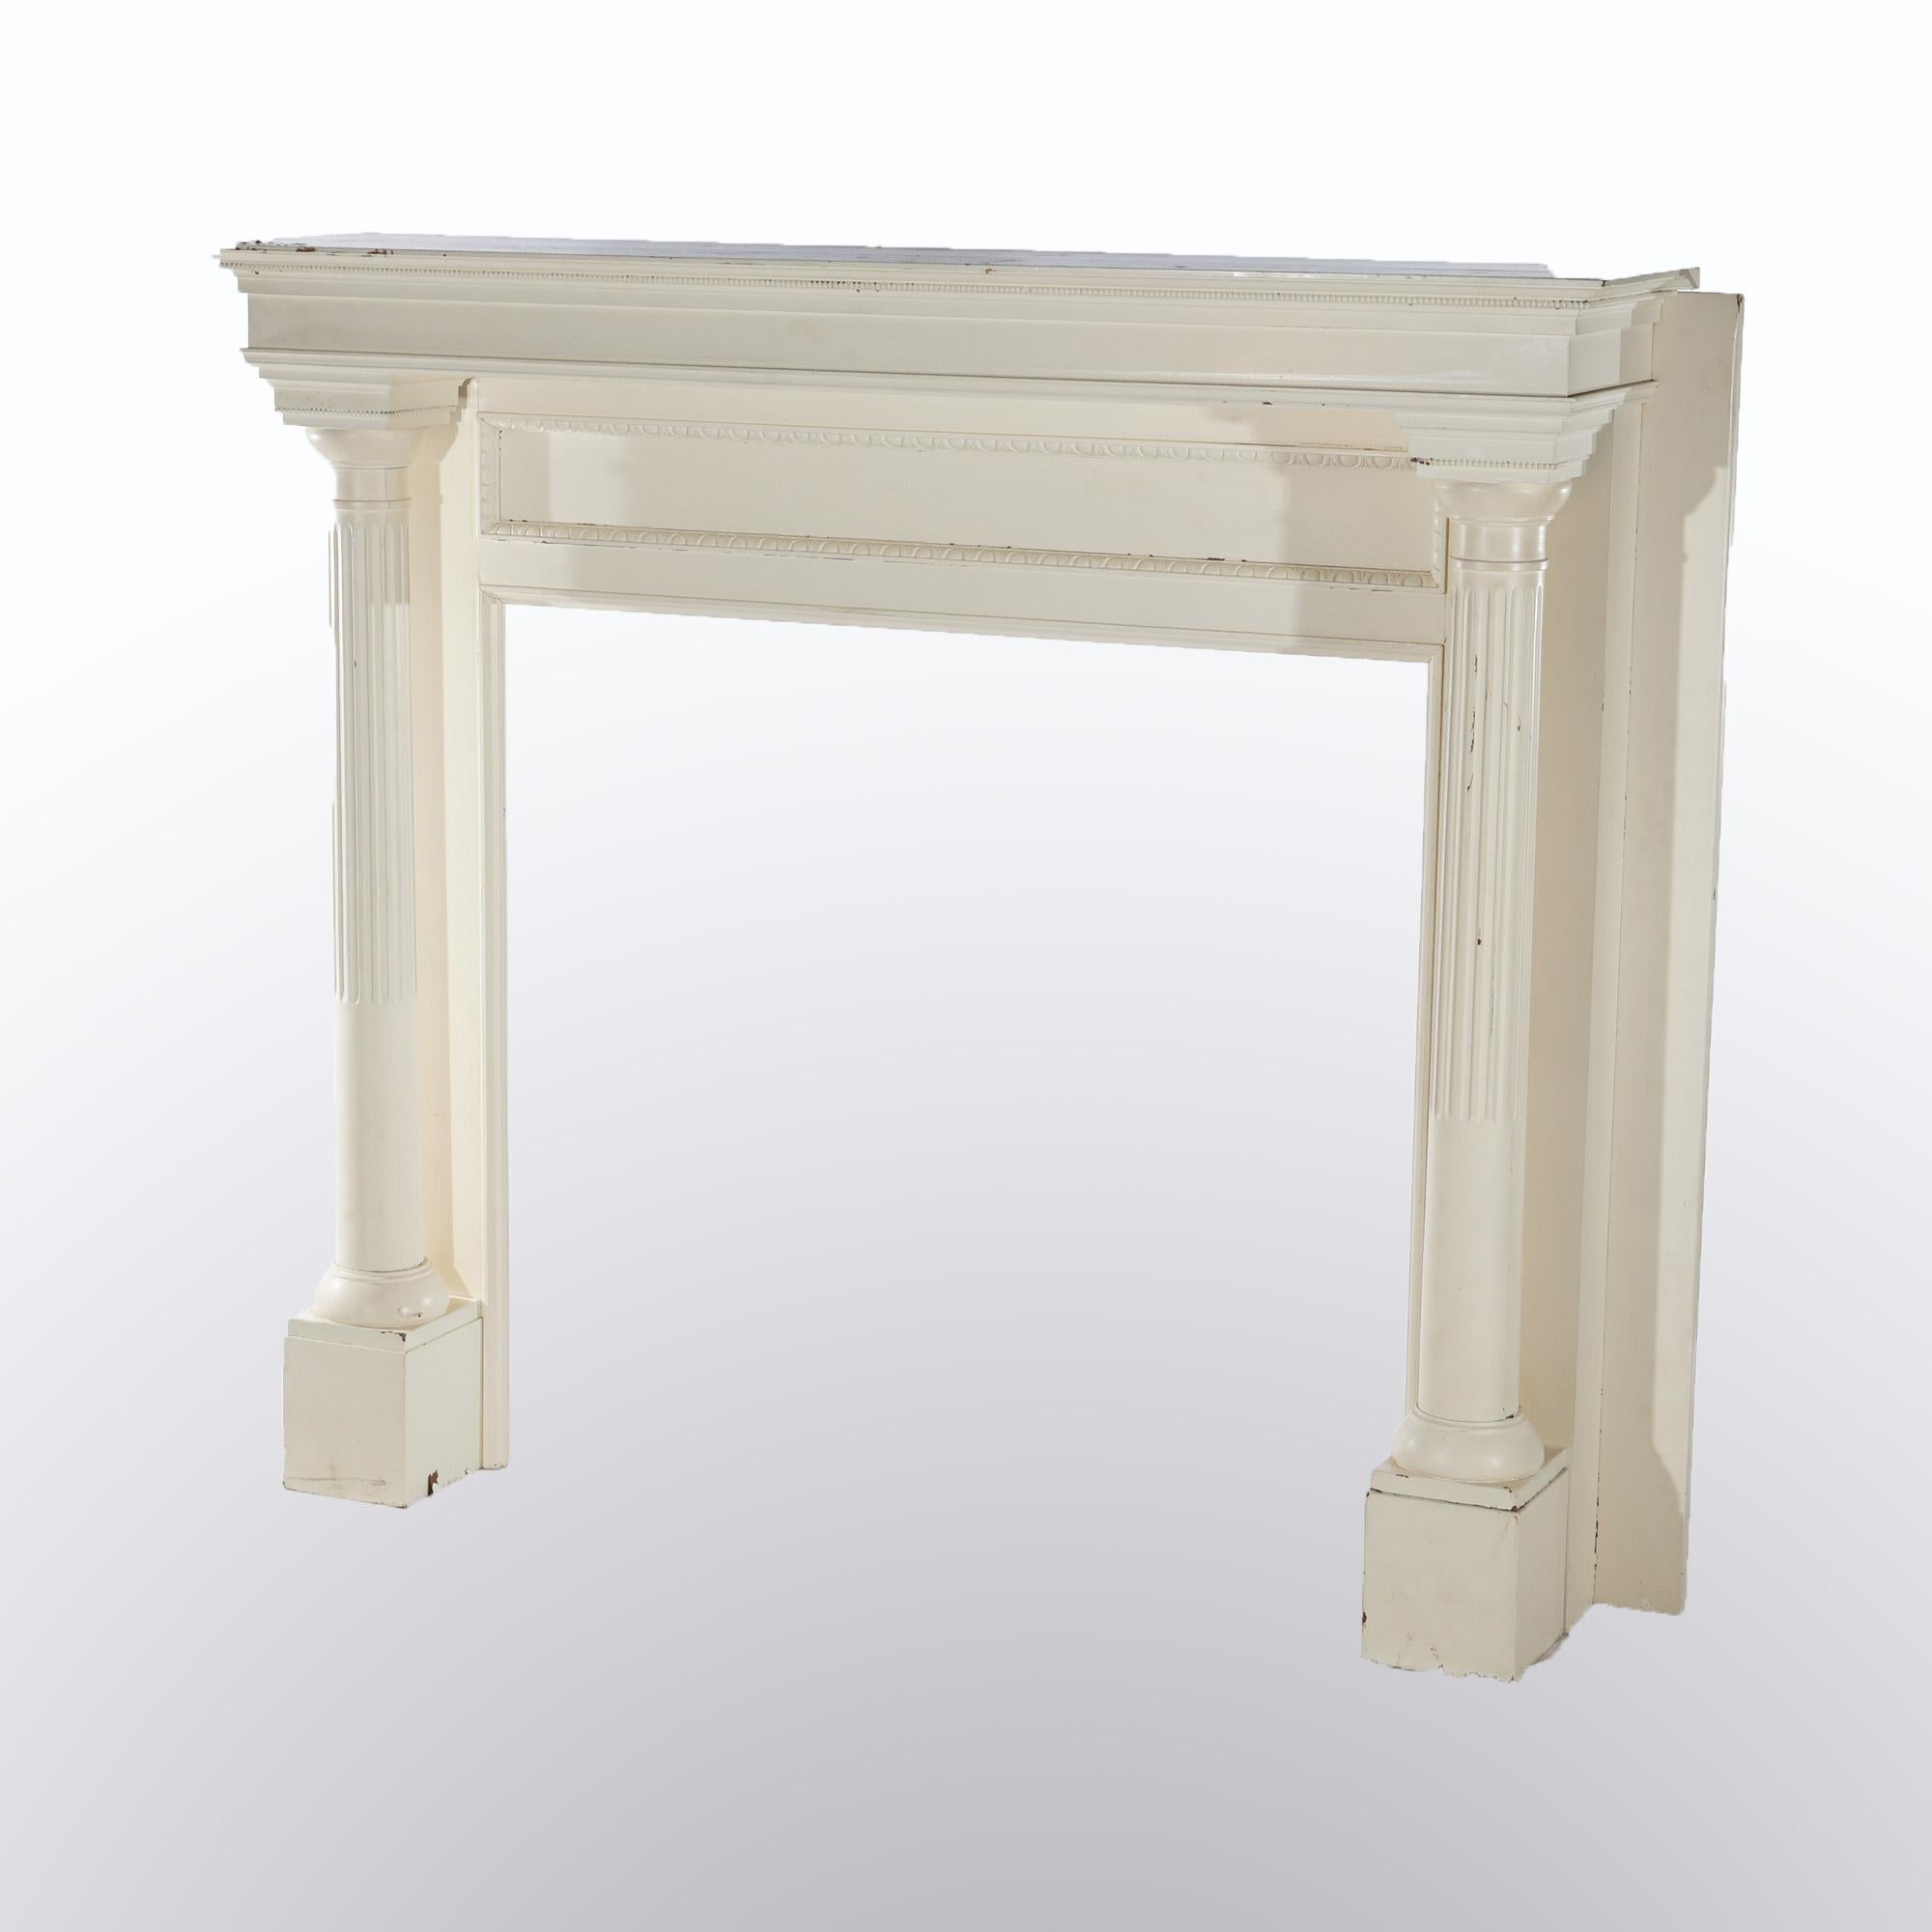 An antique Neoclassical fireplace mantle offers custom painted oak construction with flanking Greek Doric fluted columns, c1920

Measures - 54.75